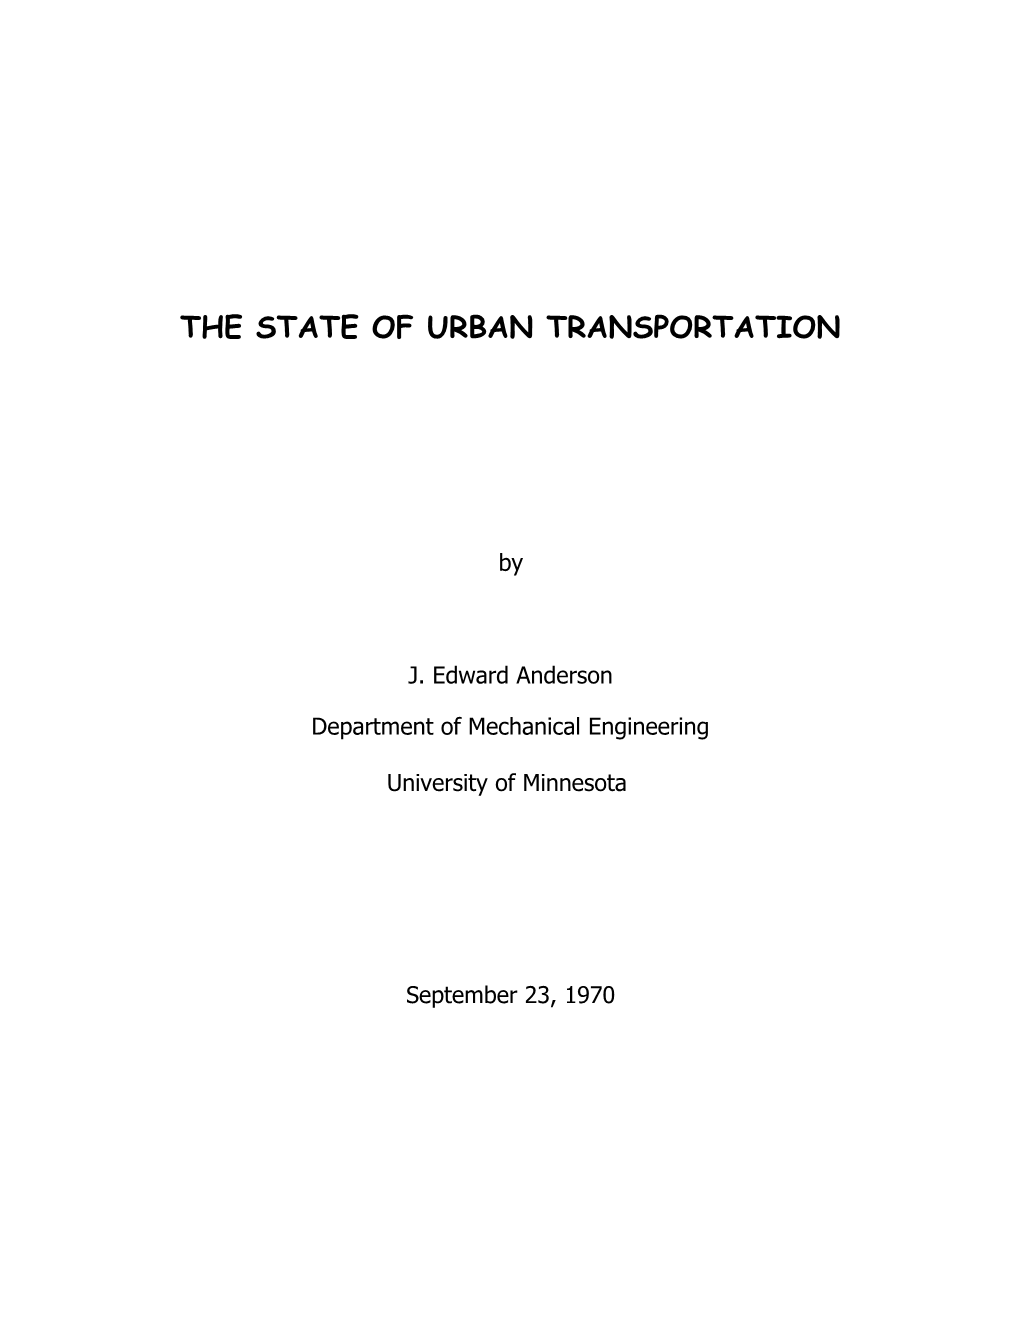 The State of Urban Transportation